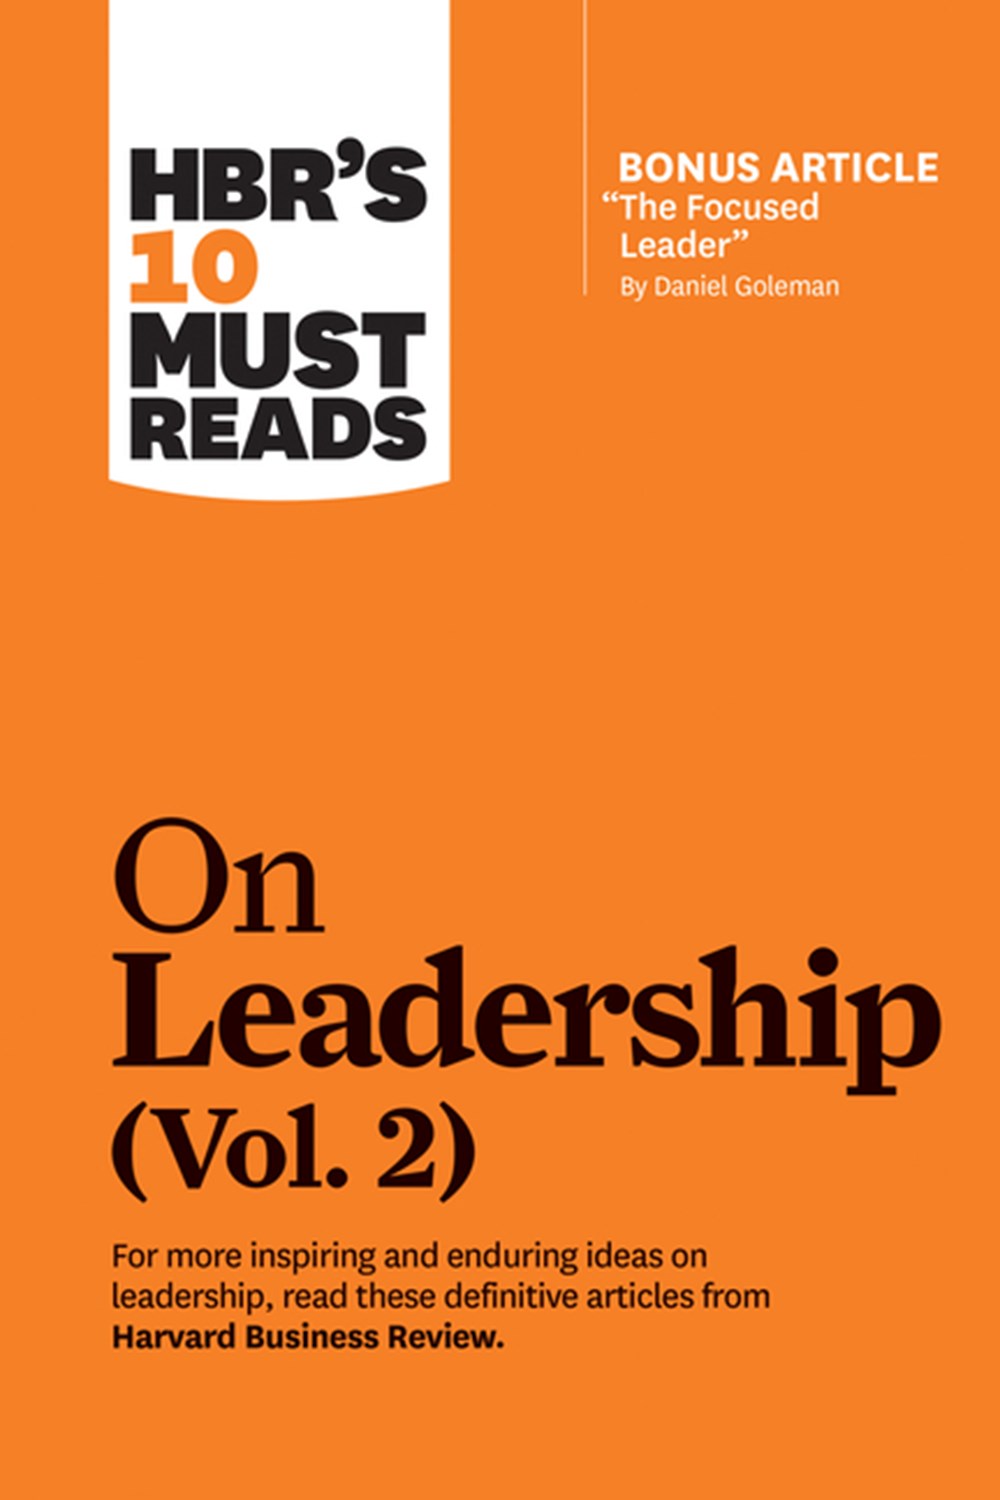 Hbr's 10 Must Reads on Leadership, Vol. 2 (with Bonus Article "the Focused Leader" by Daniel Goleman